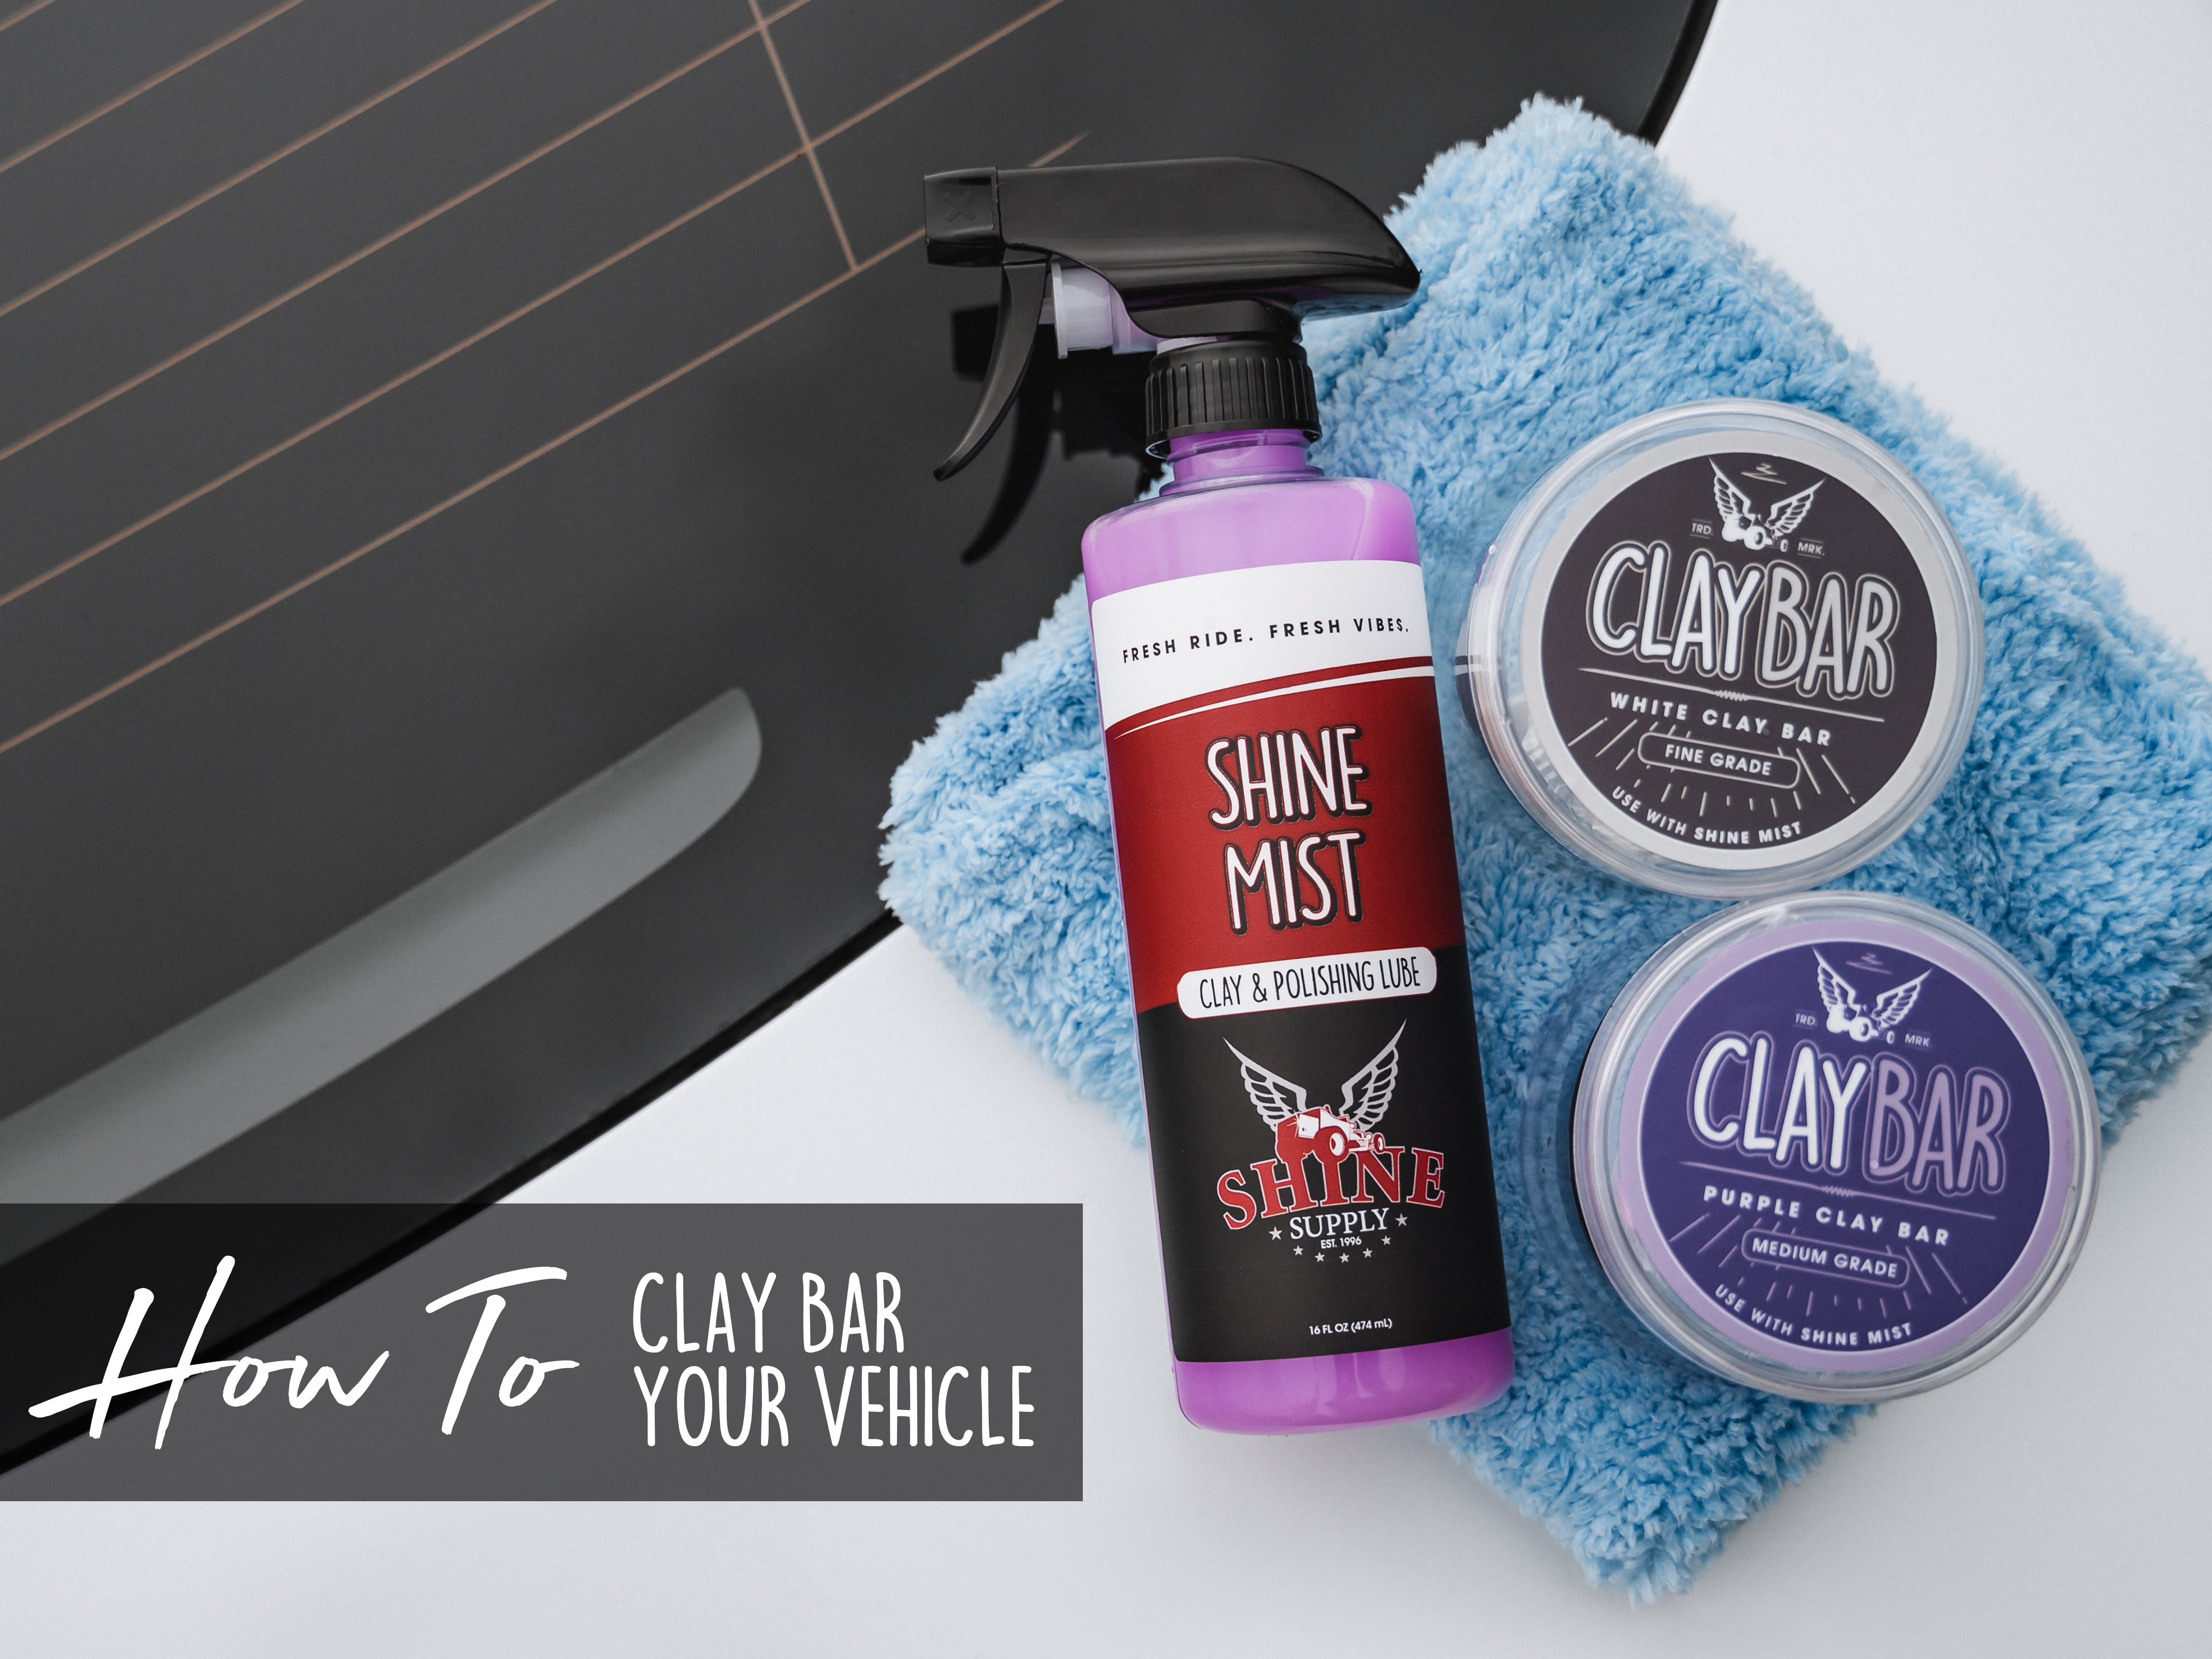 How to clay bar  your vehicle!